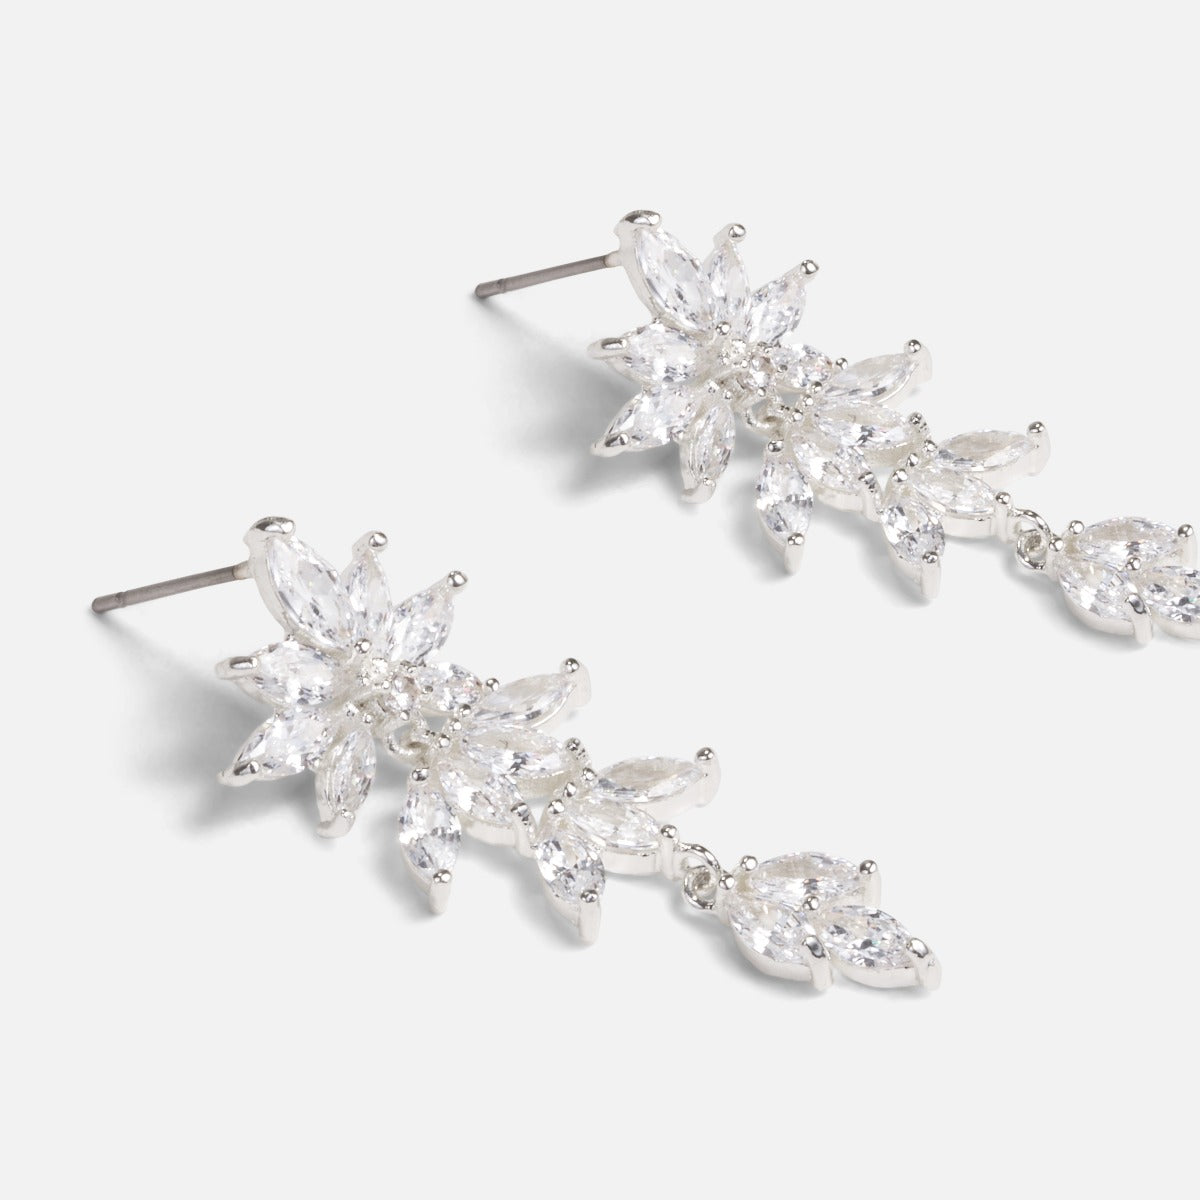 Cubic zirconia earrings with floral effect